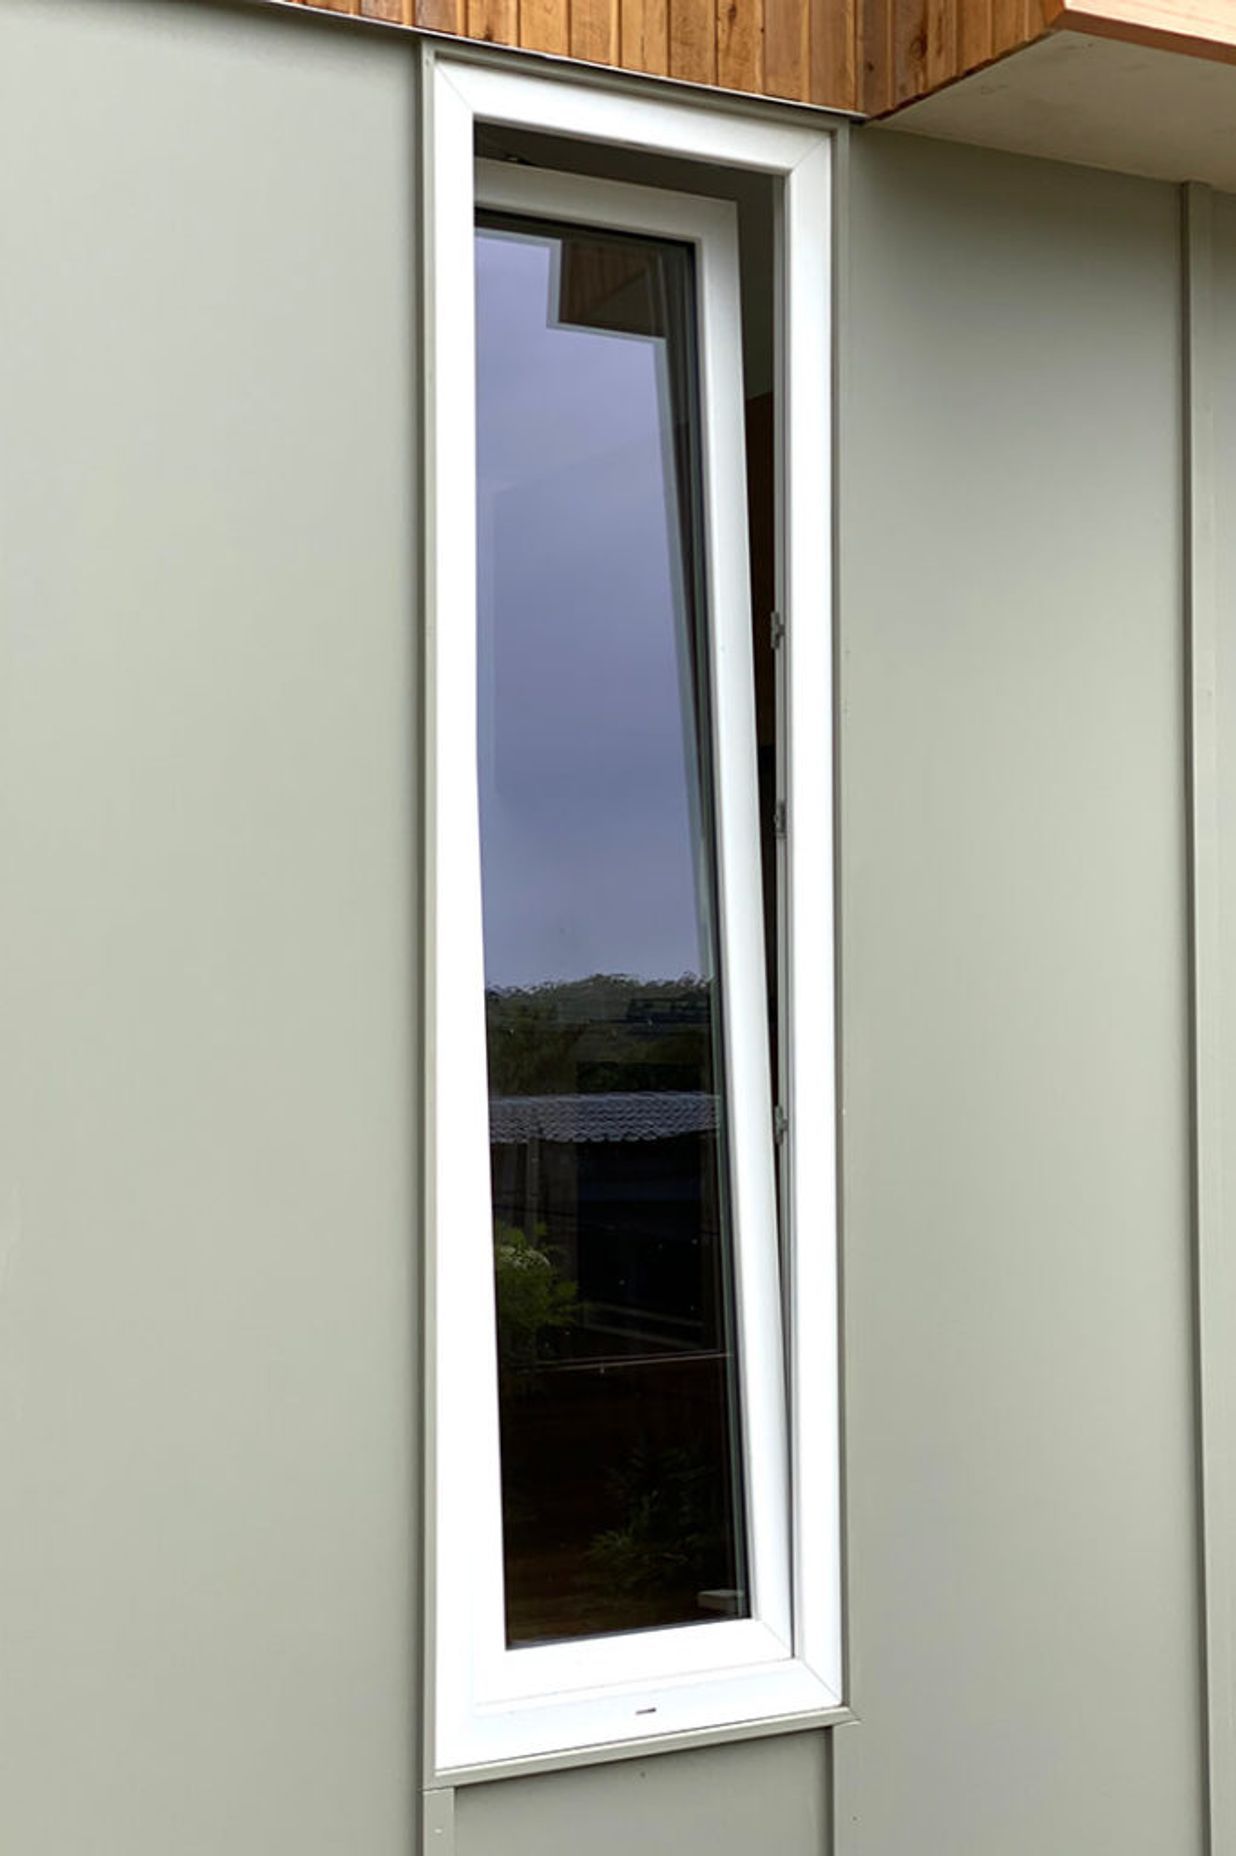 SINGLE VS DOUBLE VS TRIPLE: WHICH WINDOW IS RIGHT FOR YOUR ENERGY-EFFICIENT HOME?